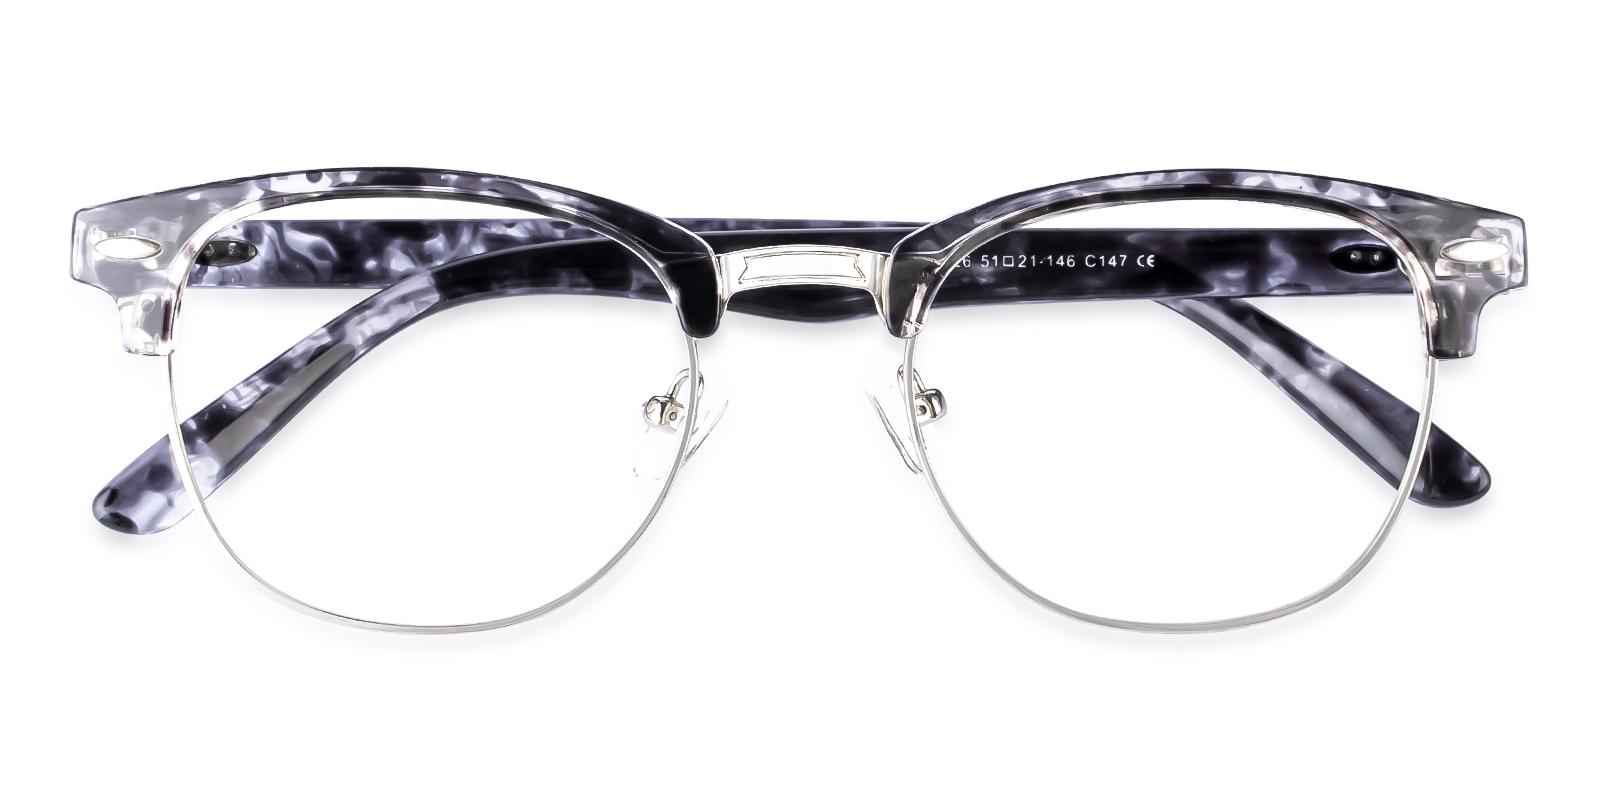 Greeley Pattern Metal Eyeglasses , NosePads Frames from ABBE Glasses